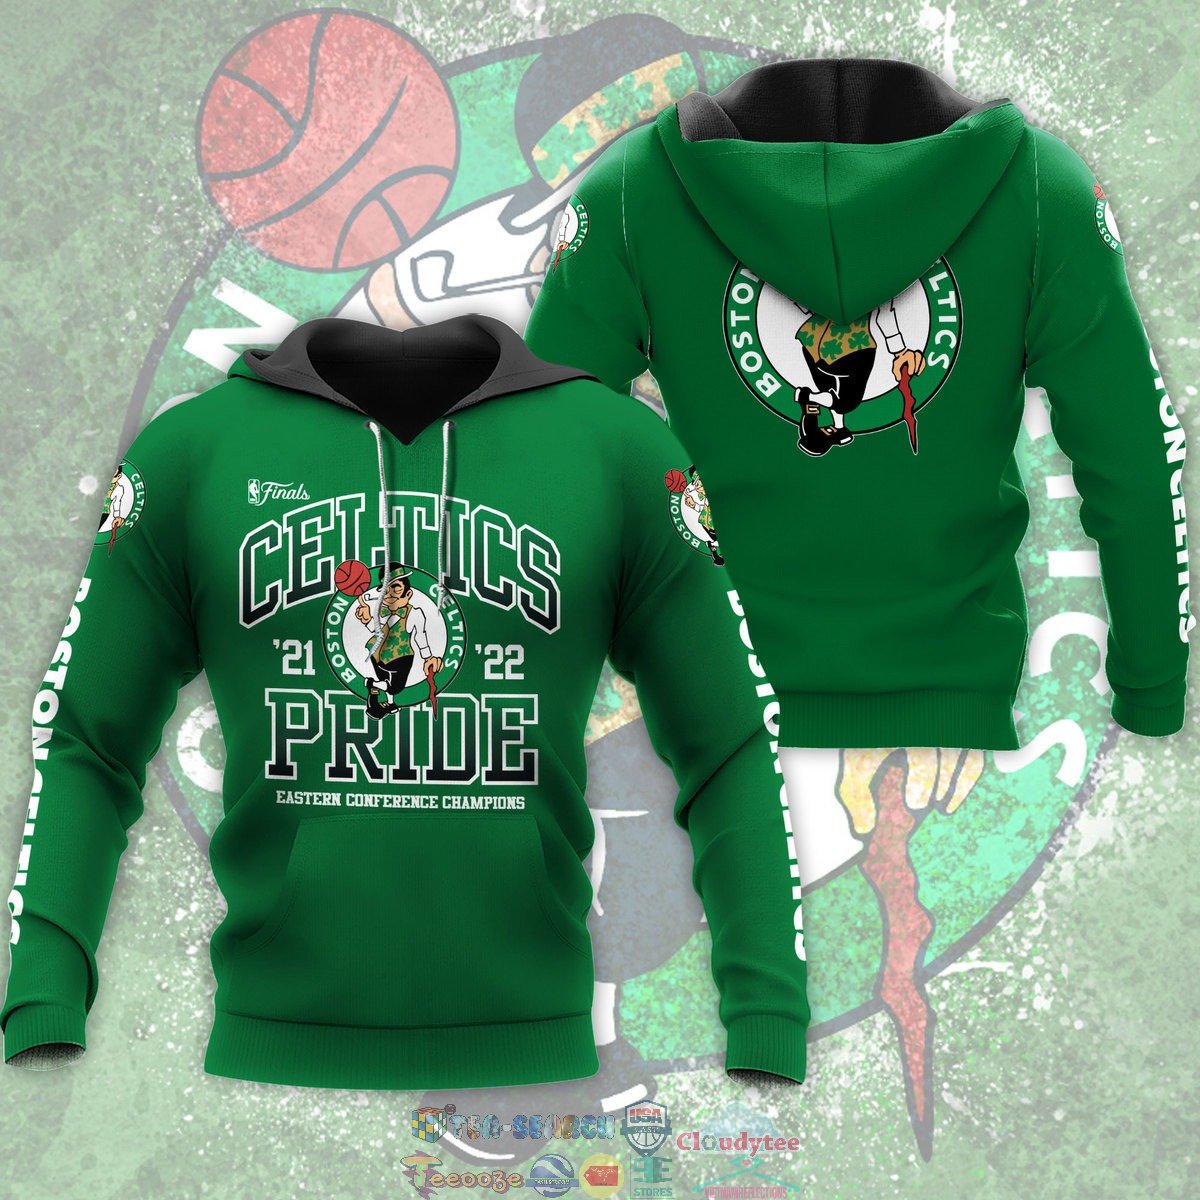 Celtics Pride 21-22 Eastern Conferrence Champions Green 3D hoodie and t-shirt – Saleoff